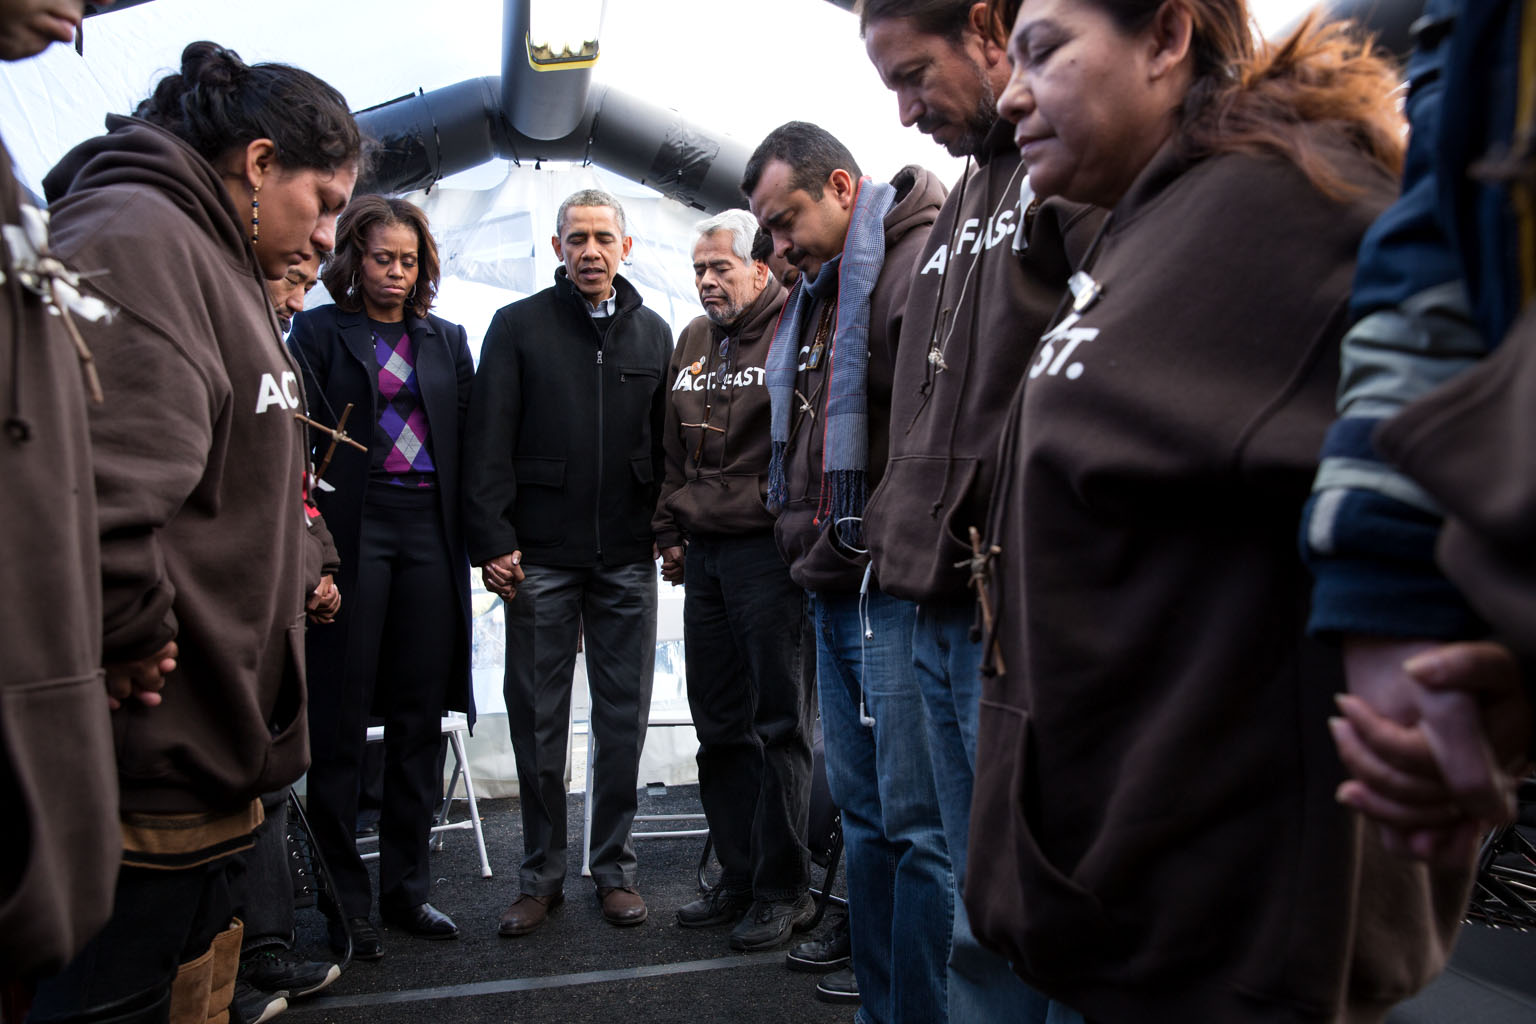 President Obama and the First Lady visited the brave individuals who are fasting in the shadow of the Capitol, sacrificing their health in an effort to get Congress to act swiftly on commonsense immigration reform.